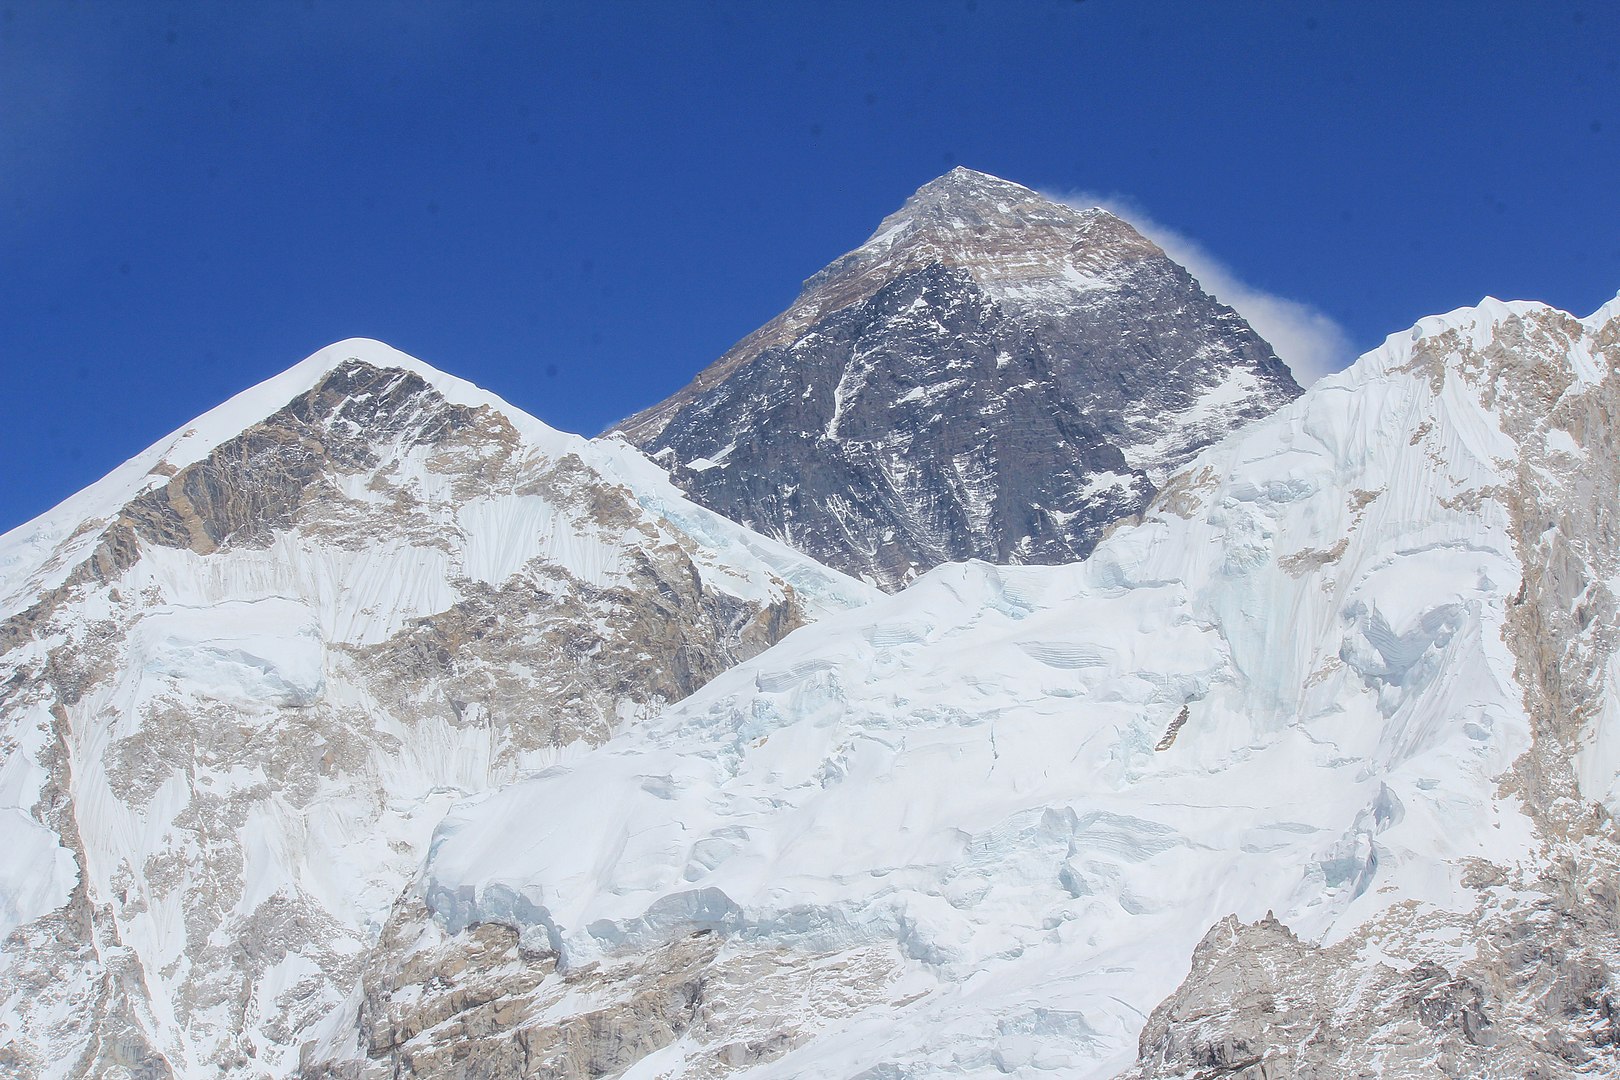 List of Leap Years, Mount Everest